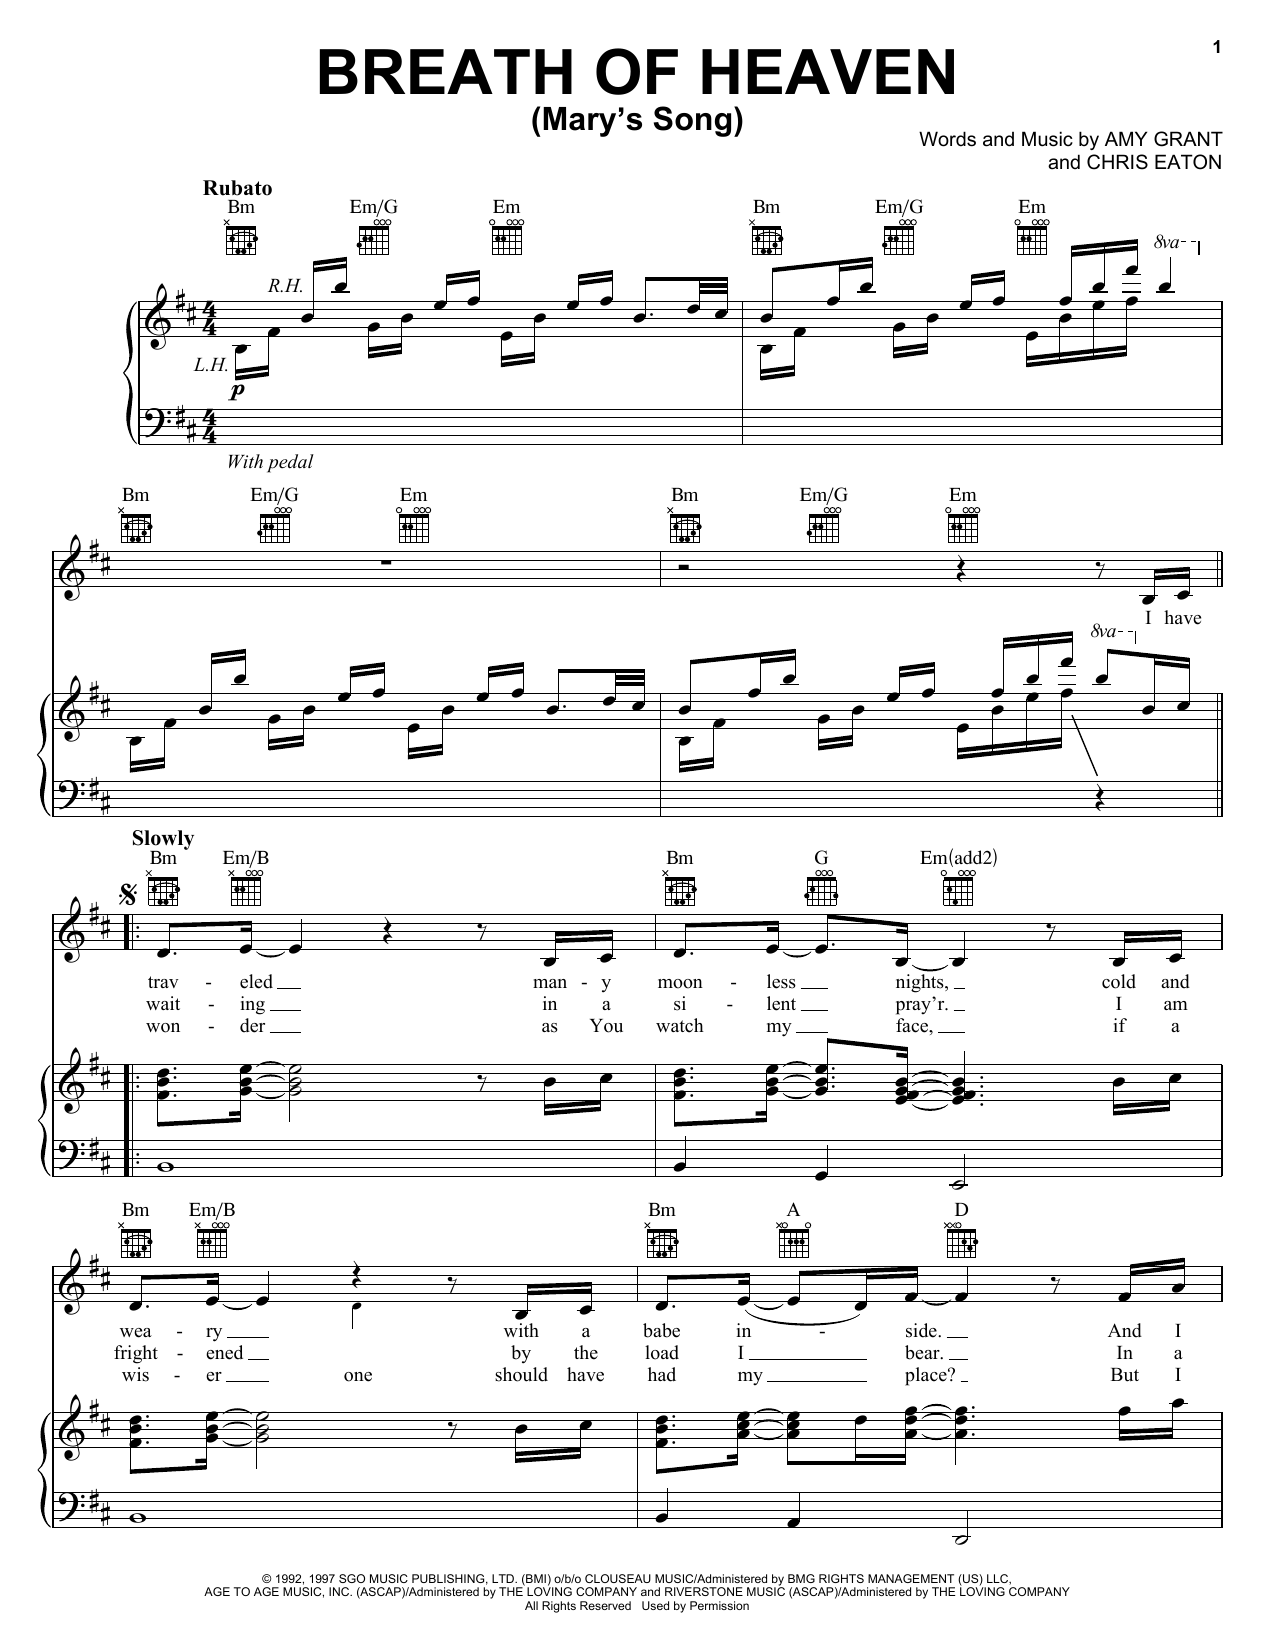 Amy Grant Breath Of Heaven (Mary's Song) sheet music notes and chords. Download Printable PDF.